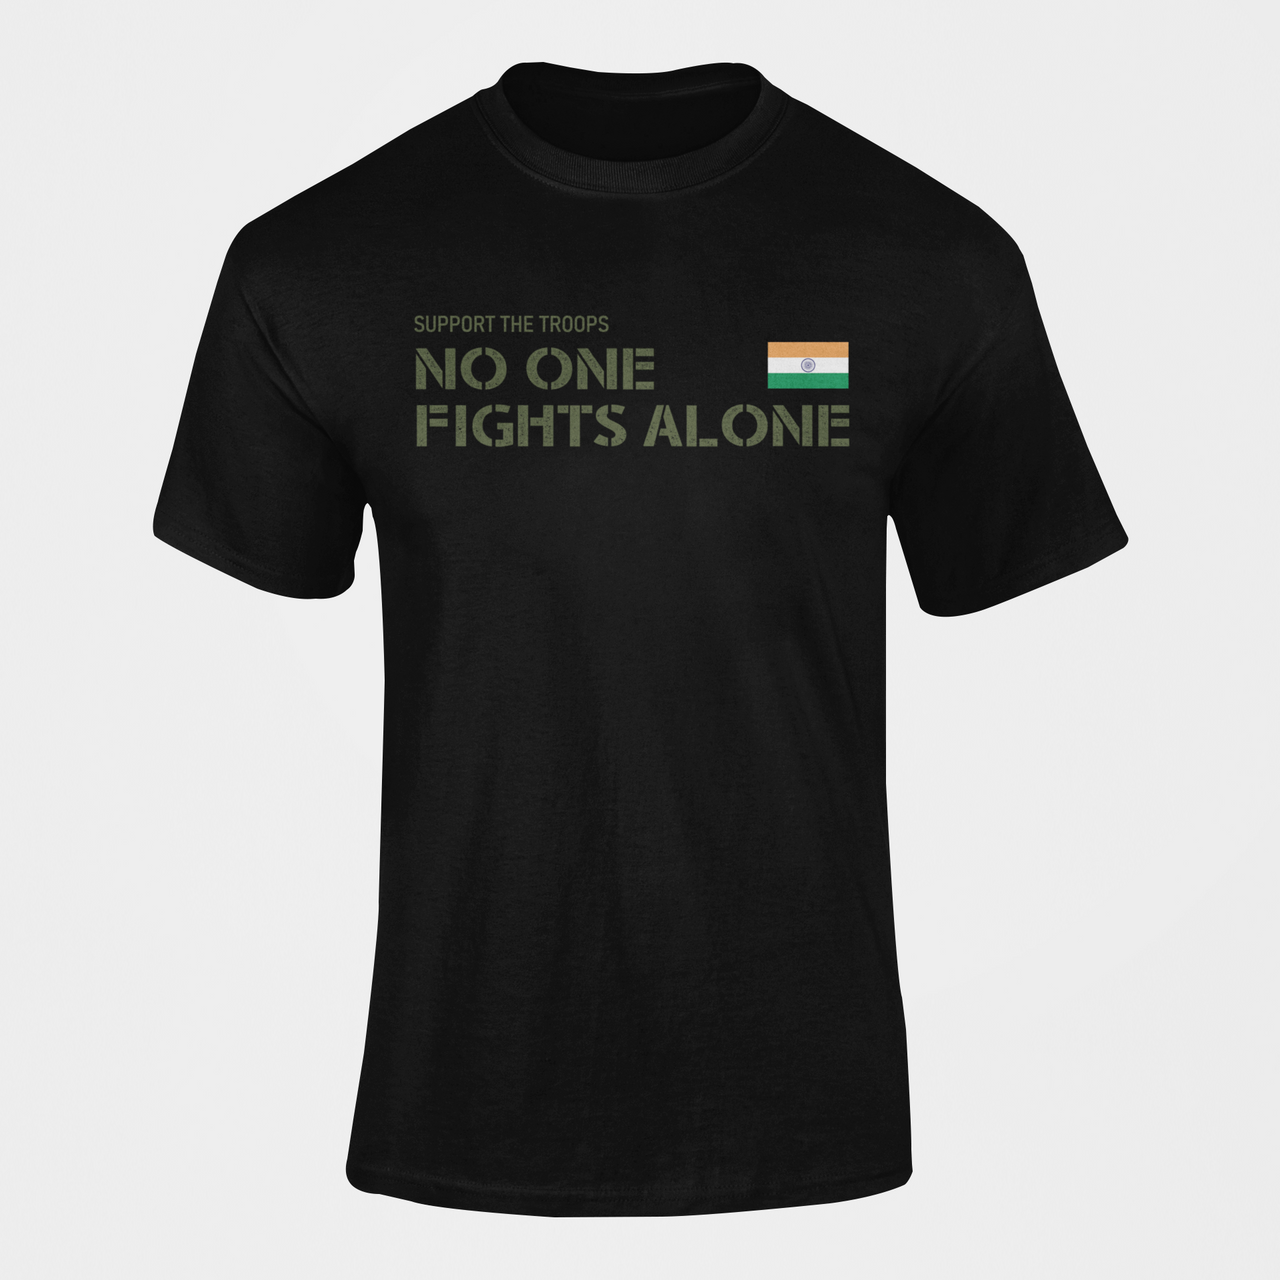 Military T-shirt - No One Fights Alone (Men)